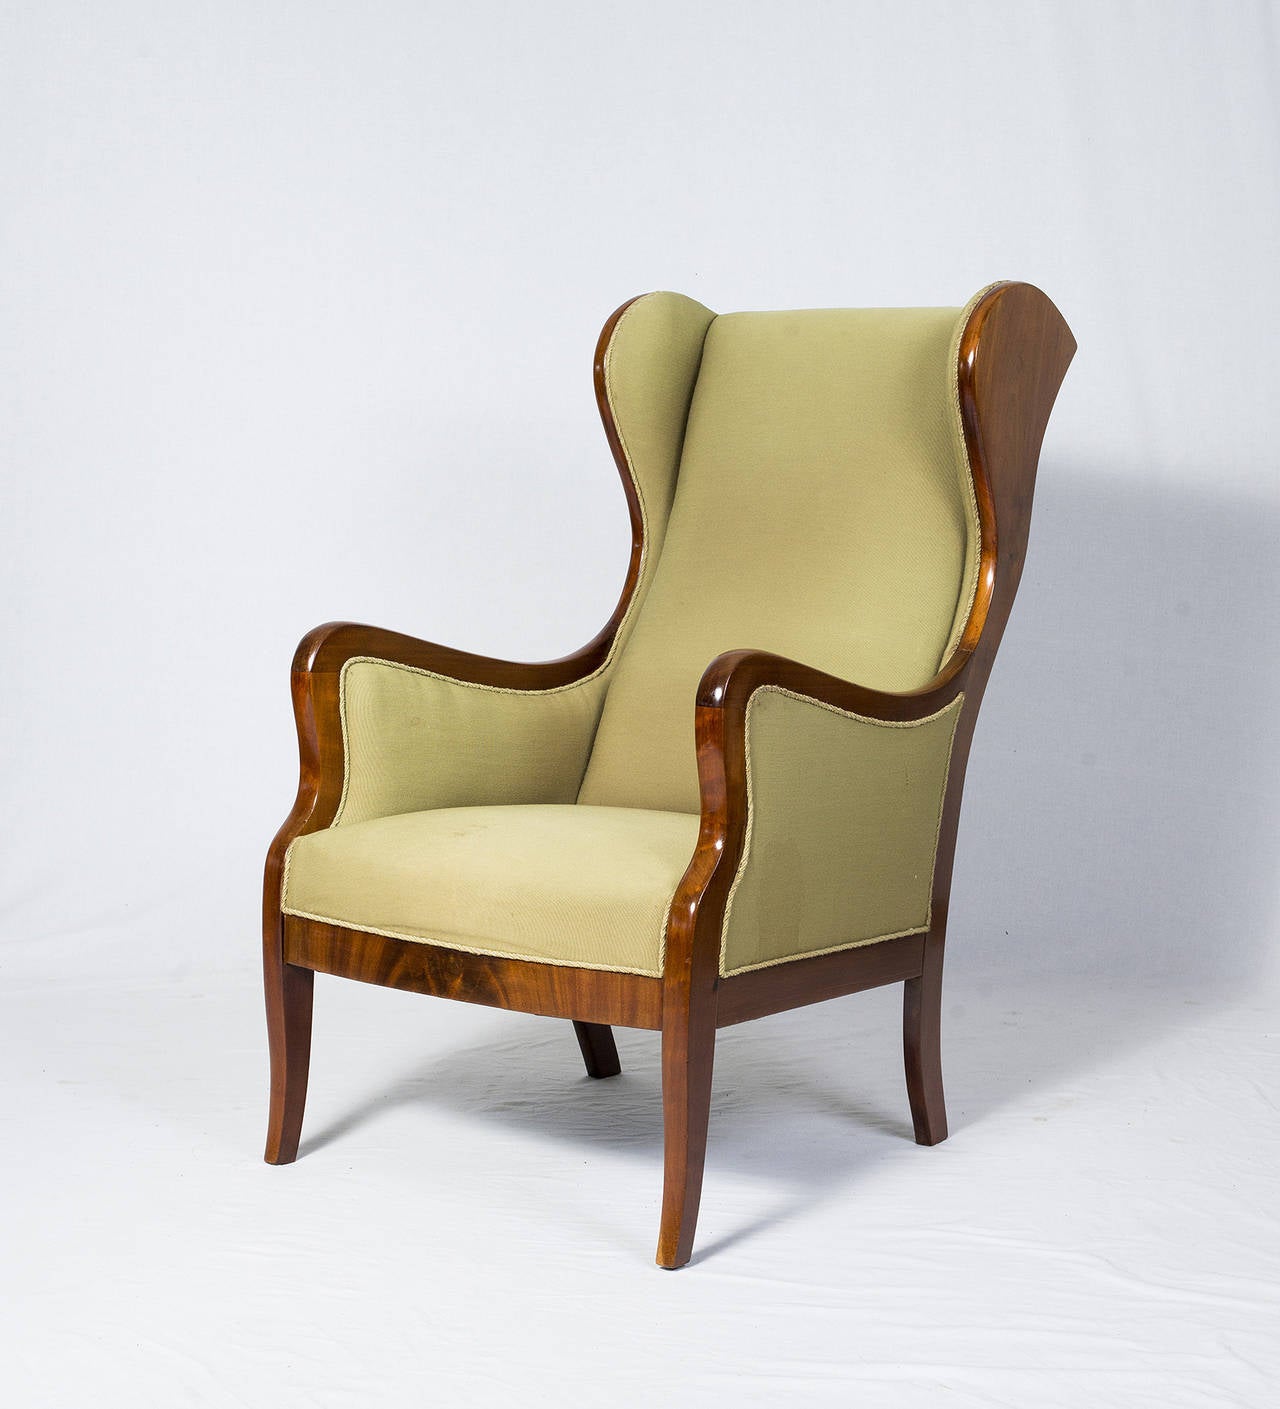 Frits Henningsen wingback armchair.   Store formerly known as ARTFUL DODGER INC